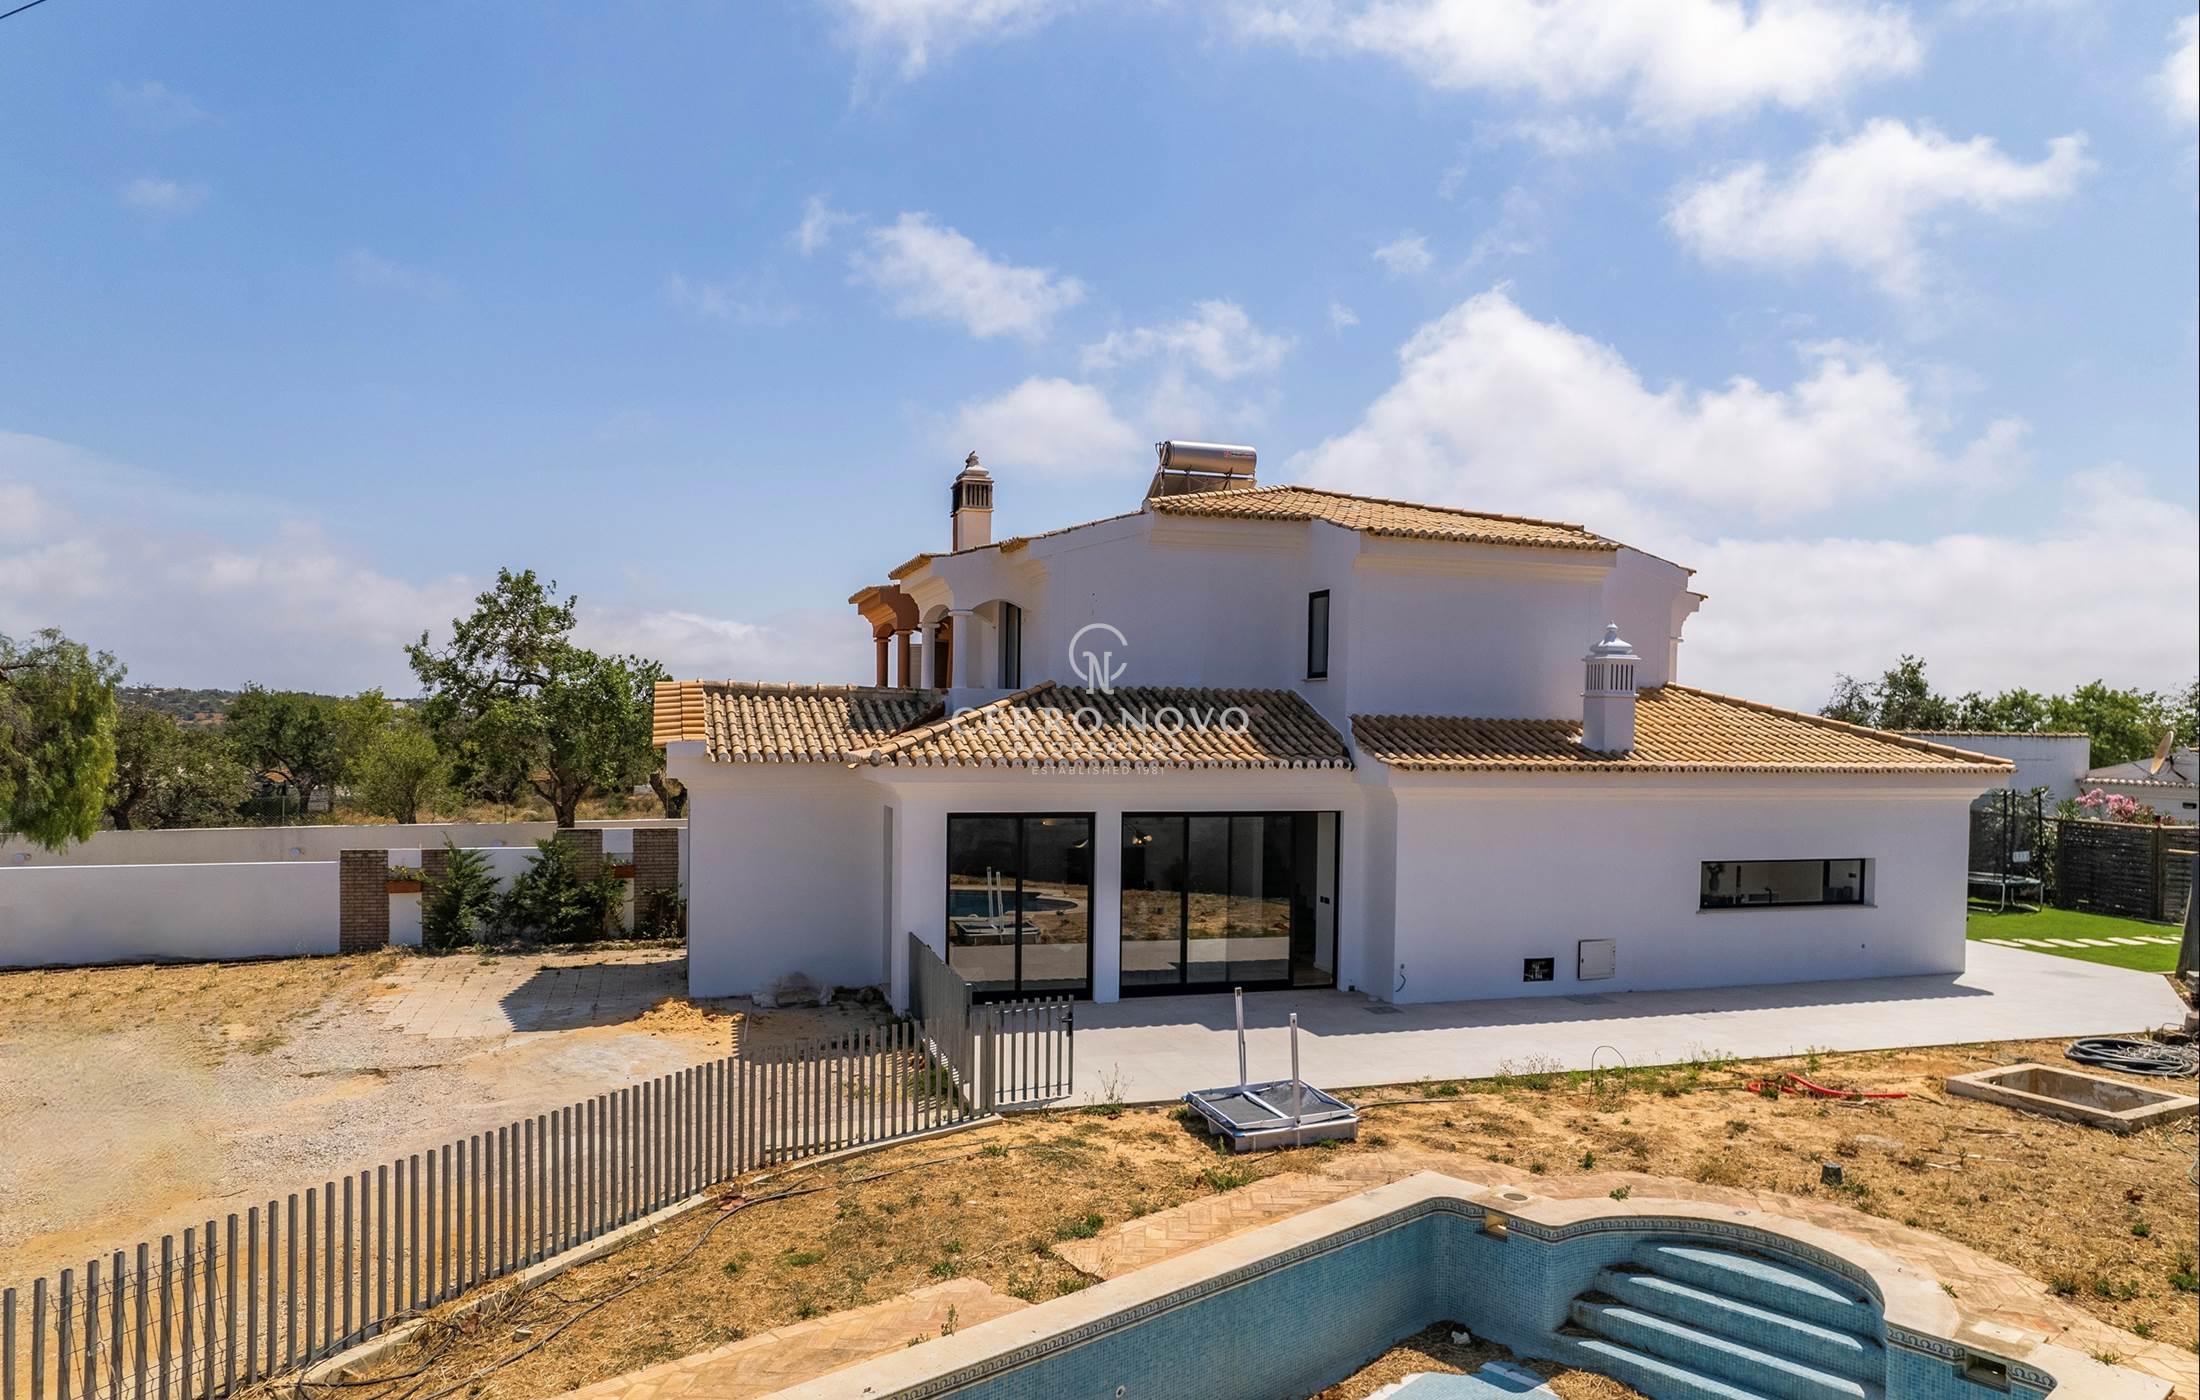 Three bedroom villa with private pool and annexe